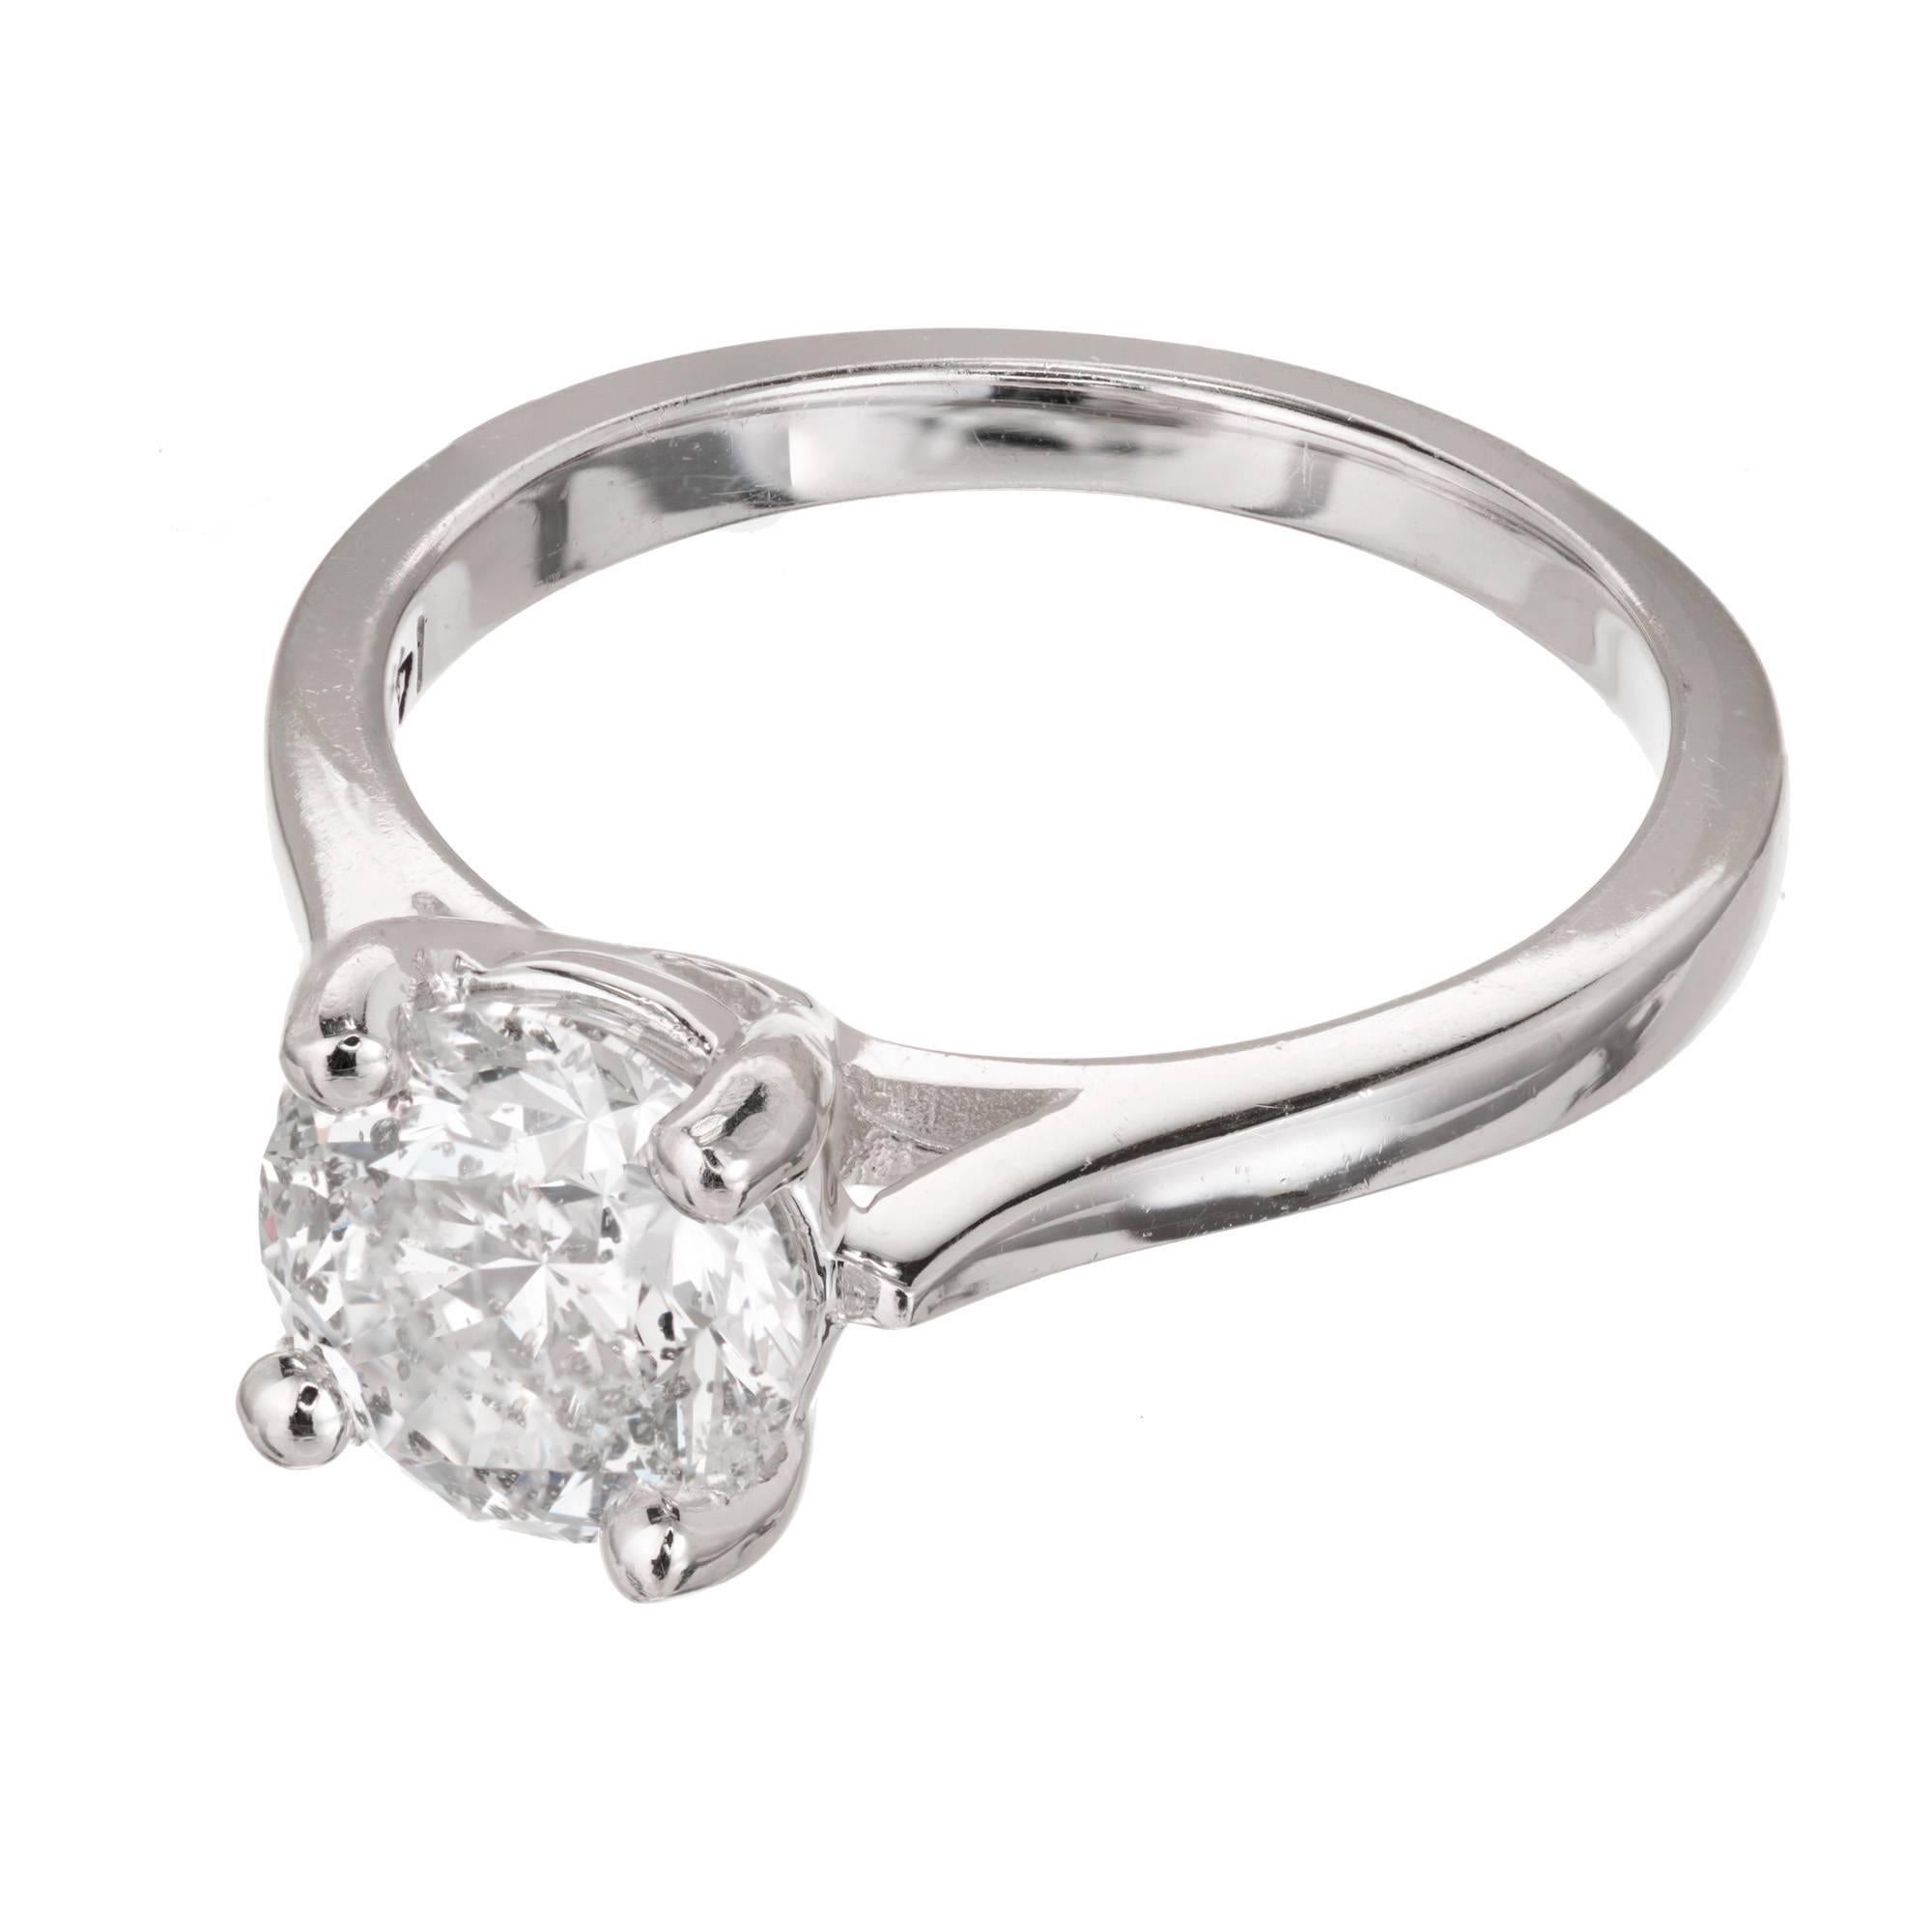 14k white gold four prong solitaire diamond engagement ring. 1.91ct center stone diamond in a 14k white gold setting.

1.91ct, E color, SI3 clarity, Table: 58% Depth: 64.3%.  EGL # US64284704D
Size 6.5 and sizable
14k White Gold
Stamped: 14k